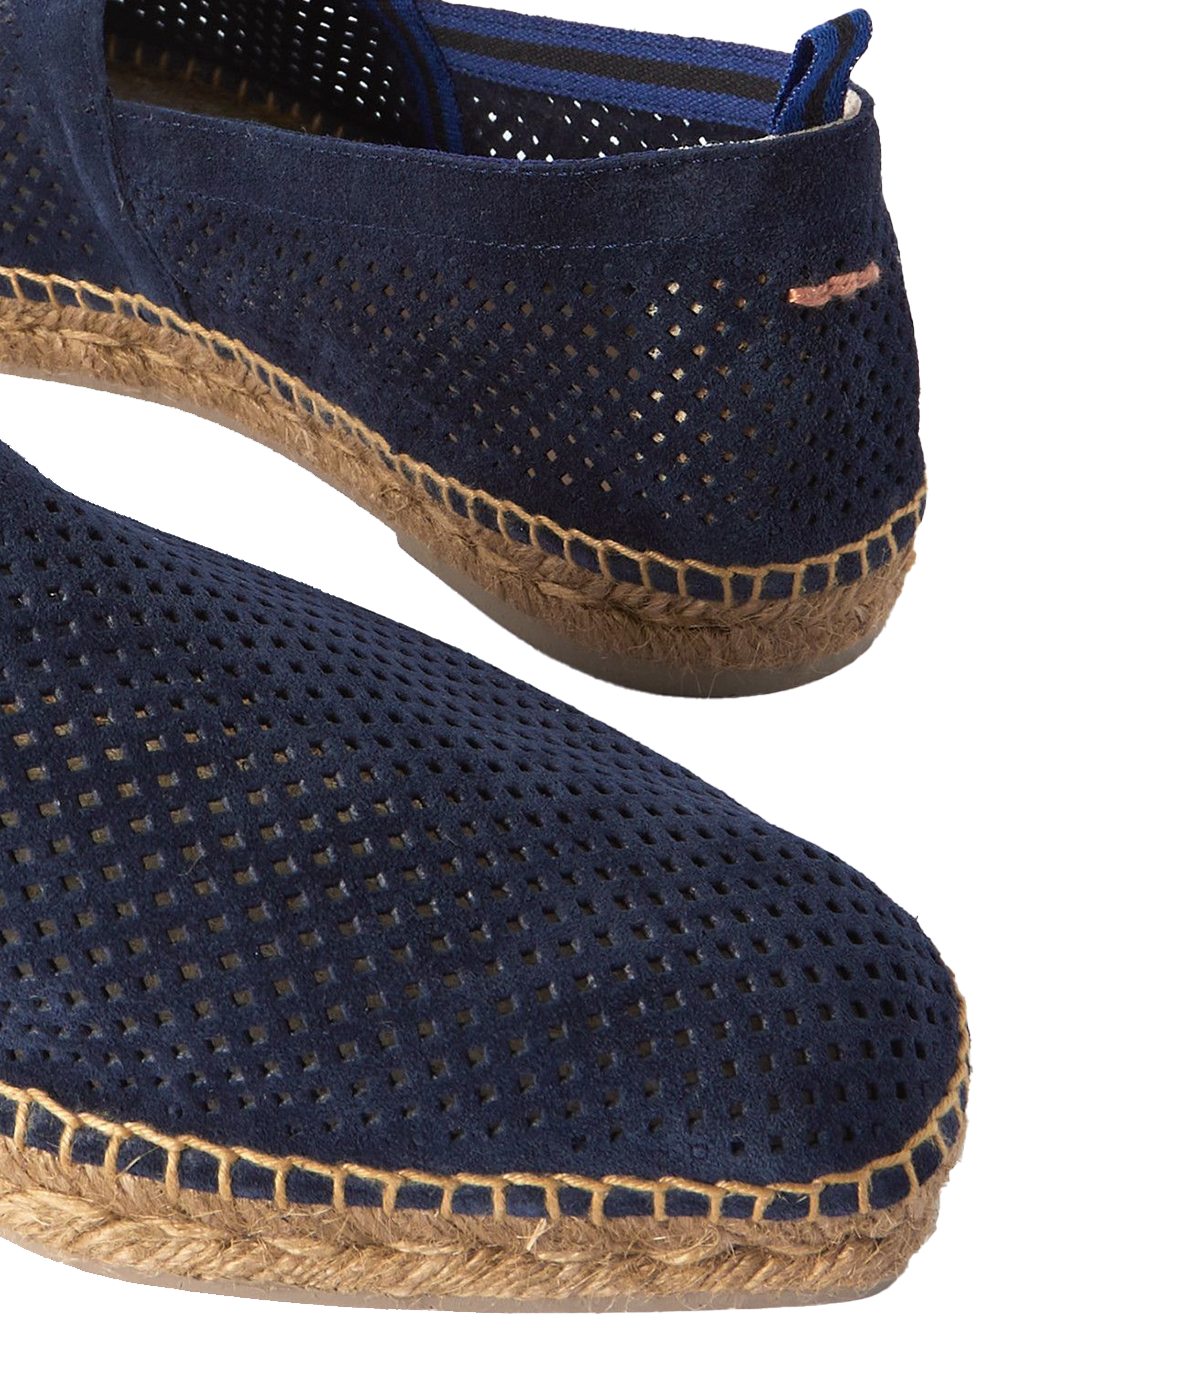 Pablo Perforated Espadrilles in Azul Oscuro